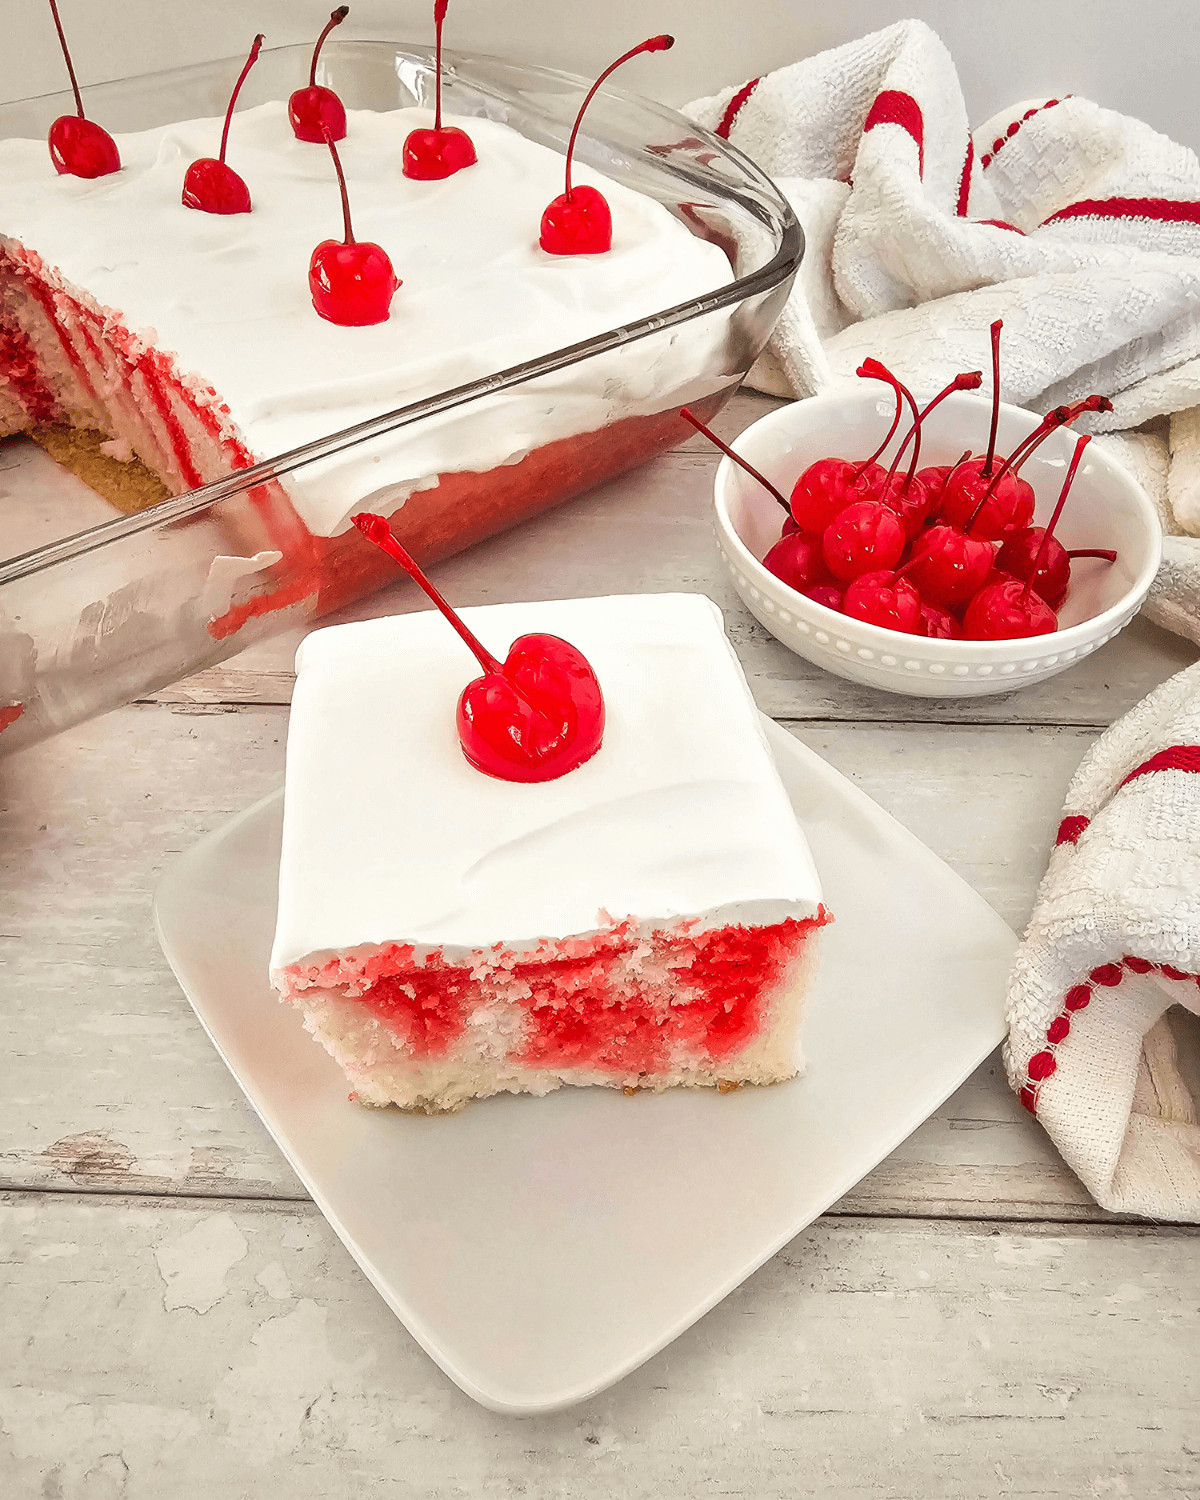 A slice of cherry poke cake on a white plate, with a glass dish of cherry poke cake and a bowl of cherries in the background.